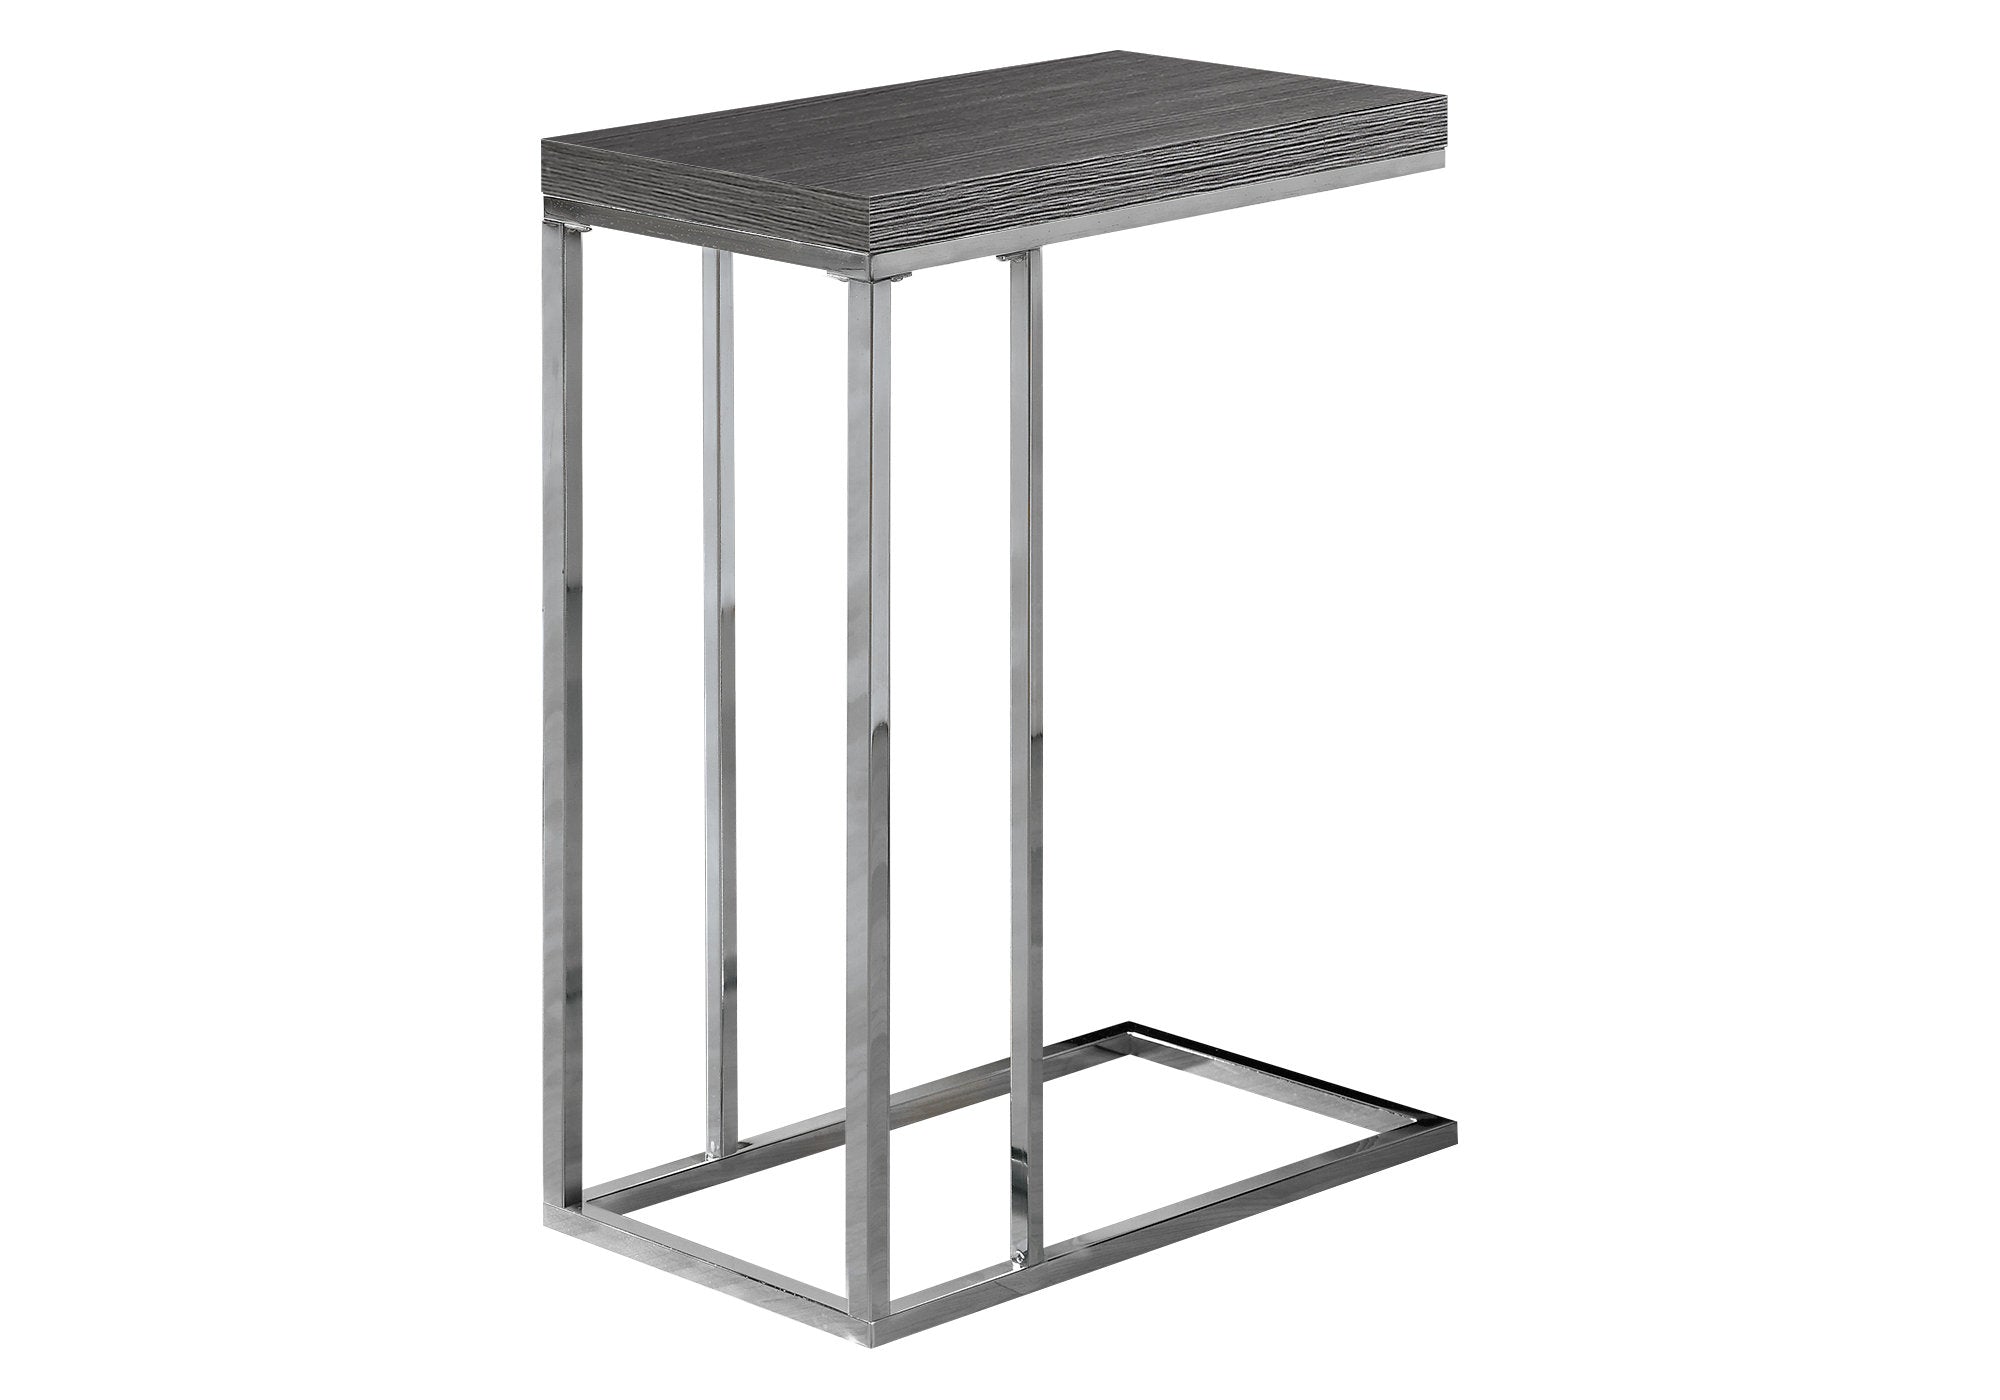 MN-763228    Accent Table, C-Shaped, End, Side, Snack, Living Room, Bedroom, Metal Legs, Laminate, Grey, Chrome, Contemporary, Modern